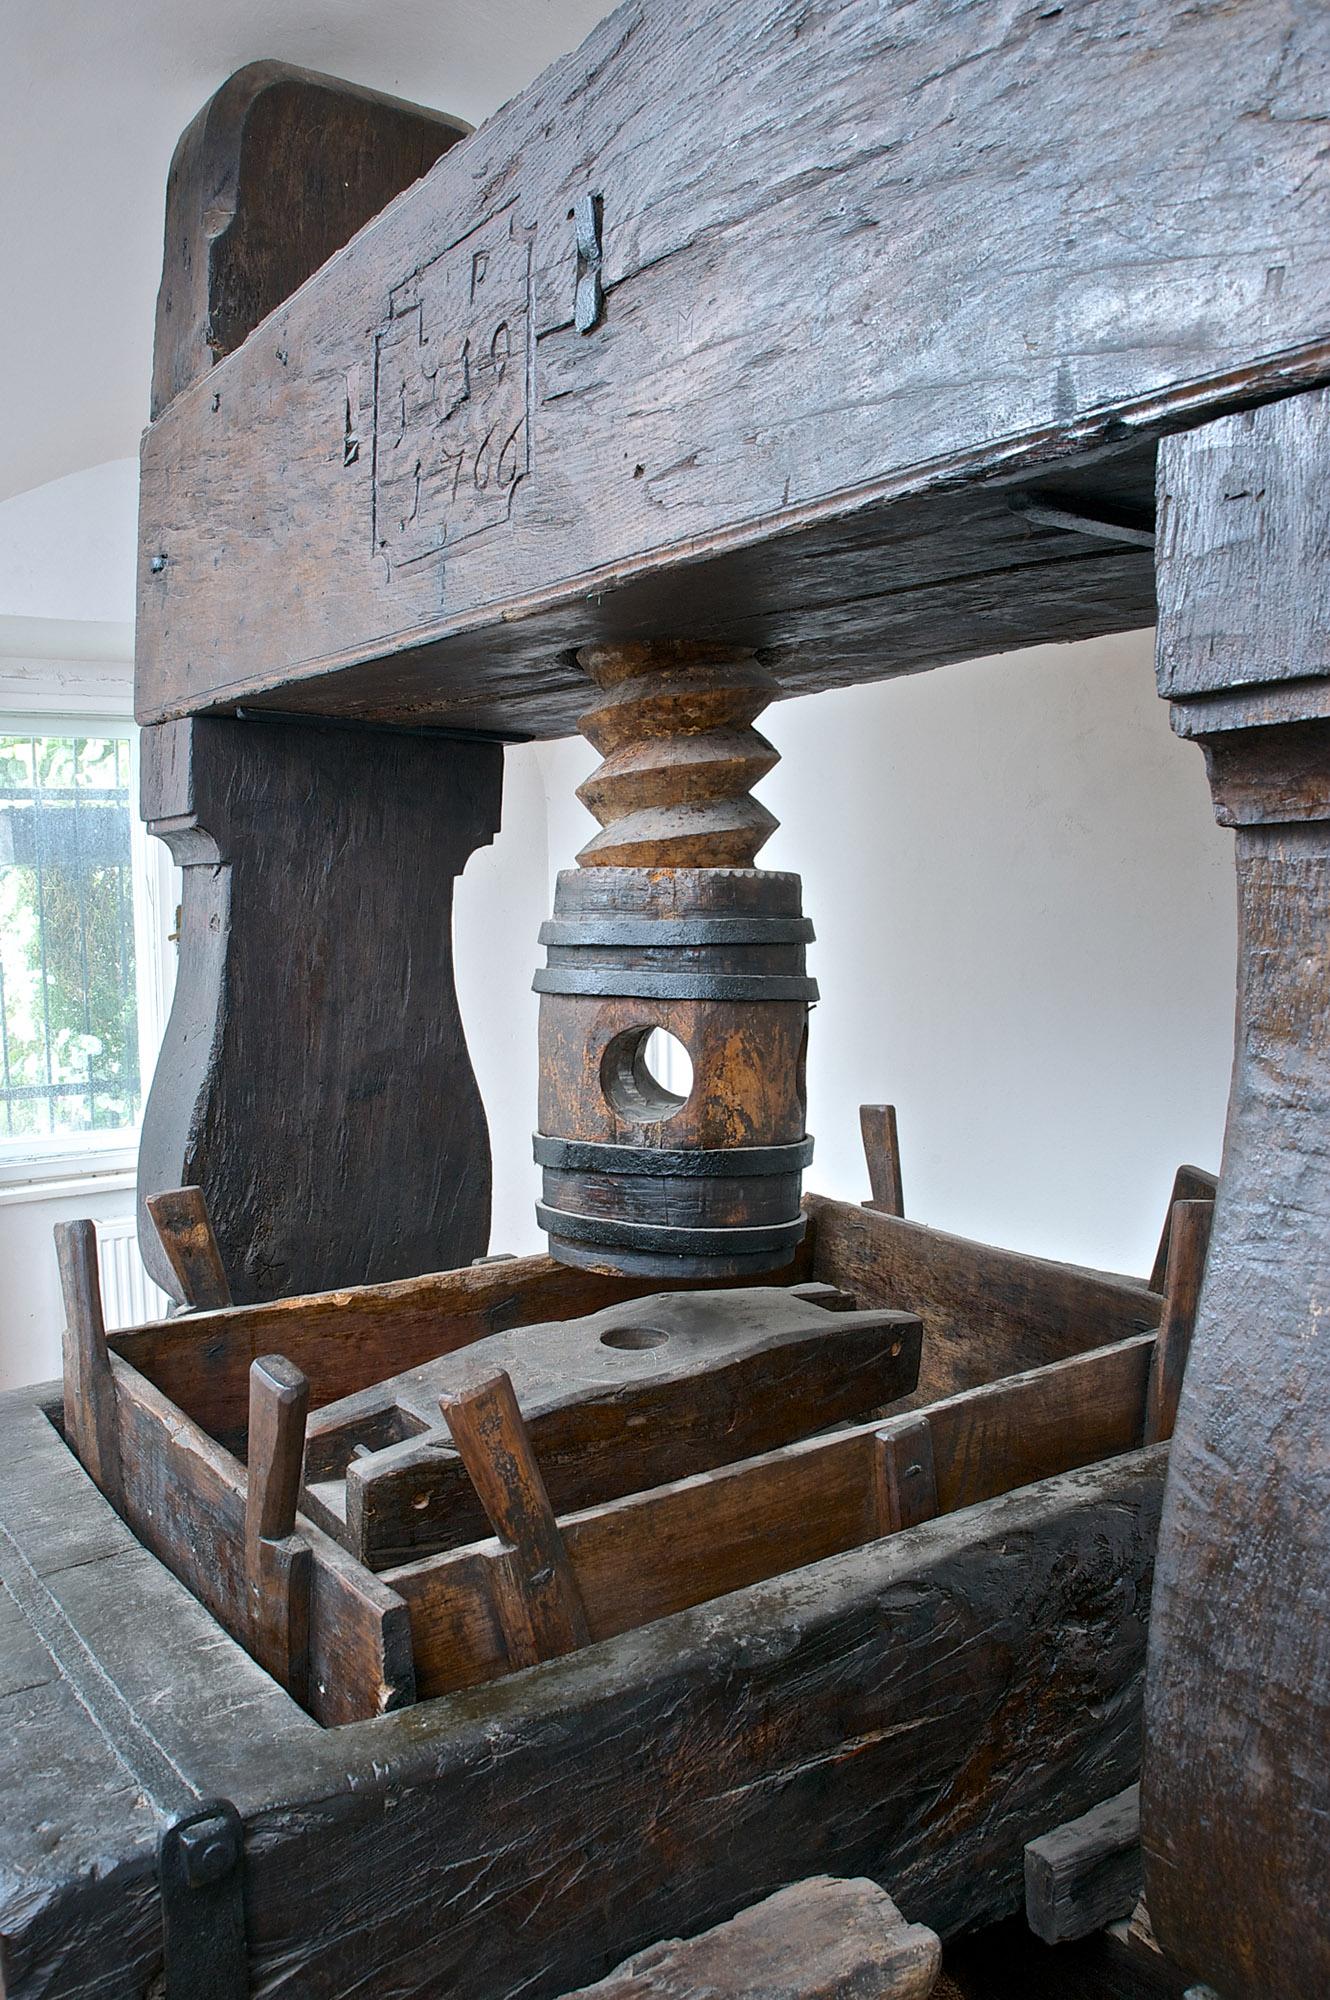 The museum houses a unique collection of wine presses, the oldest of which is a monumental spindle press from 1719, which stands 280 cm (9 feet) tall. – © Dominika Švédová